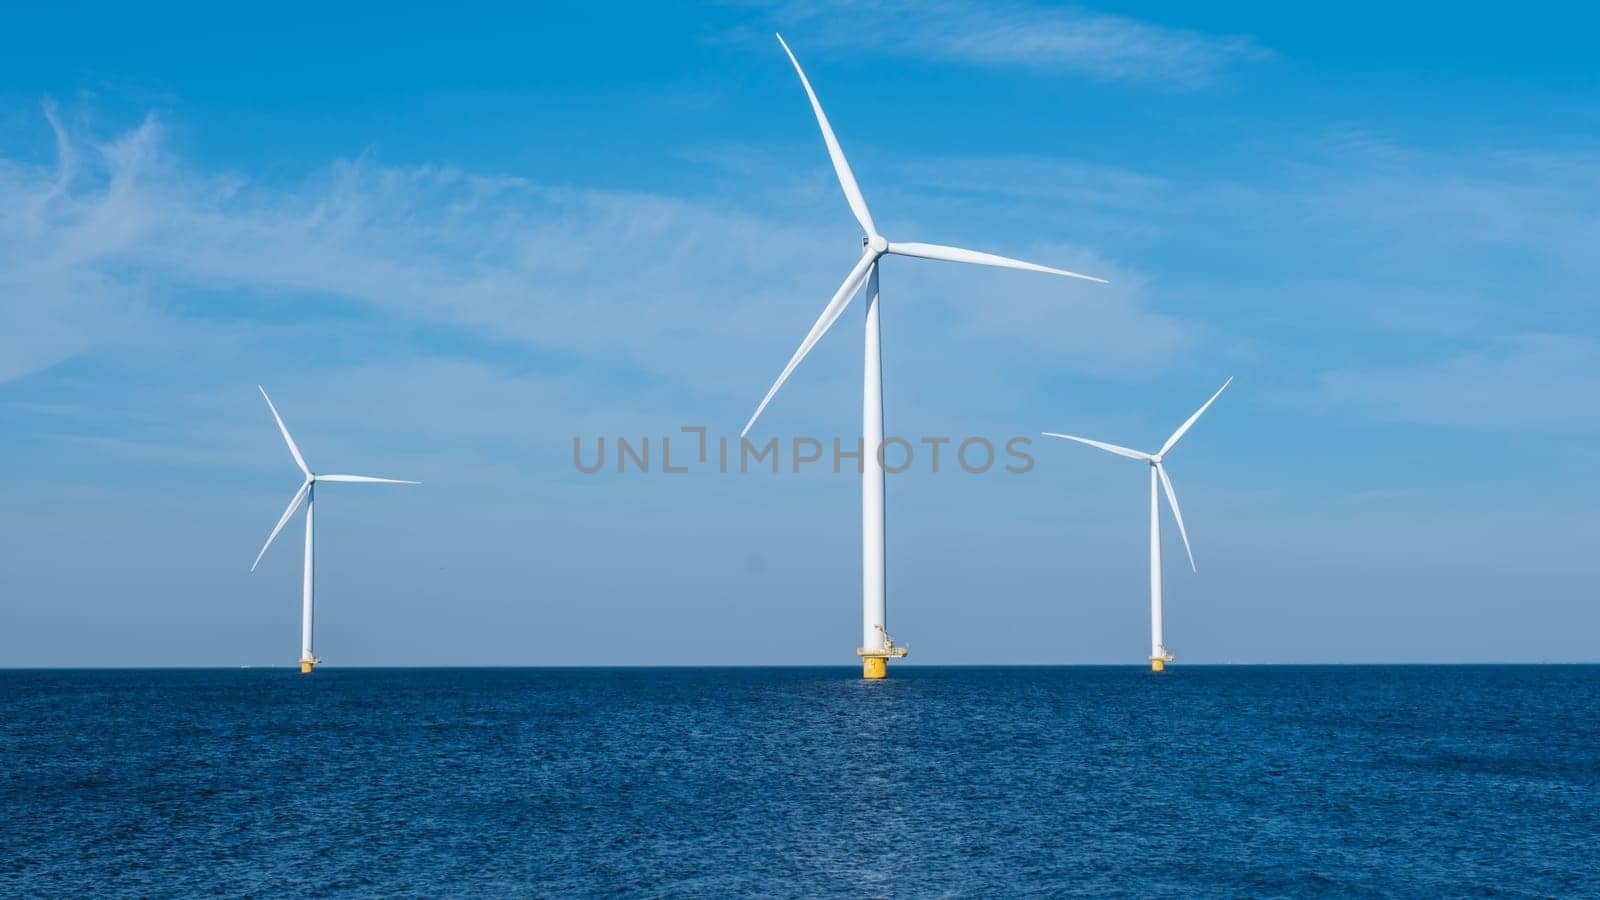 A cluster of wind turbines gracefully turning in the ocean, harnessing the power of the wind to generate renewable energy by fokkebok